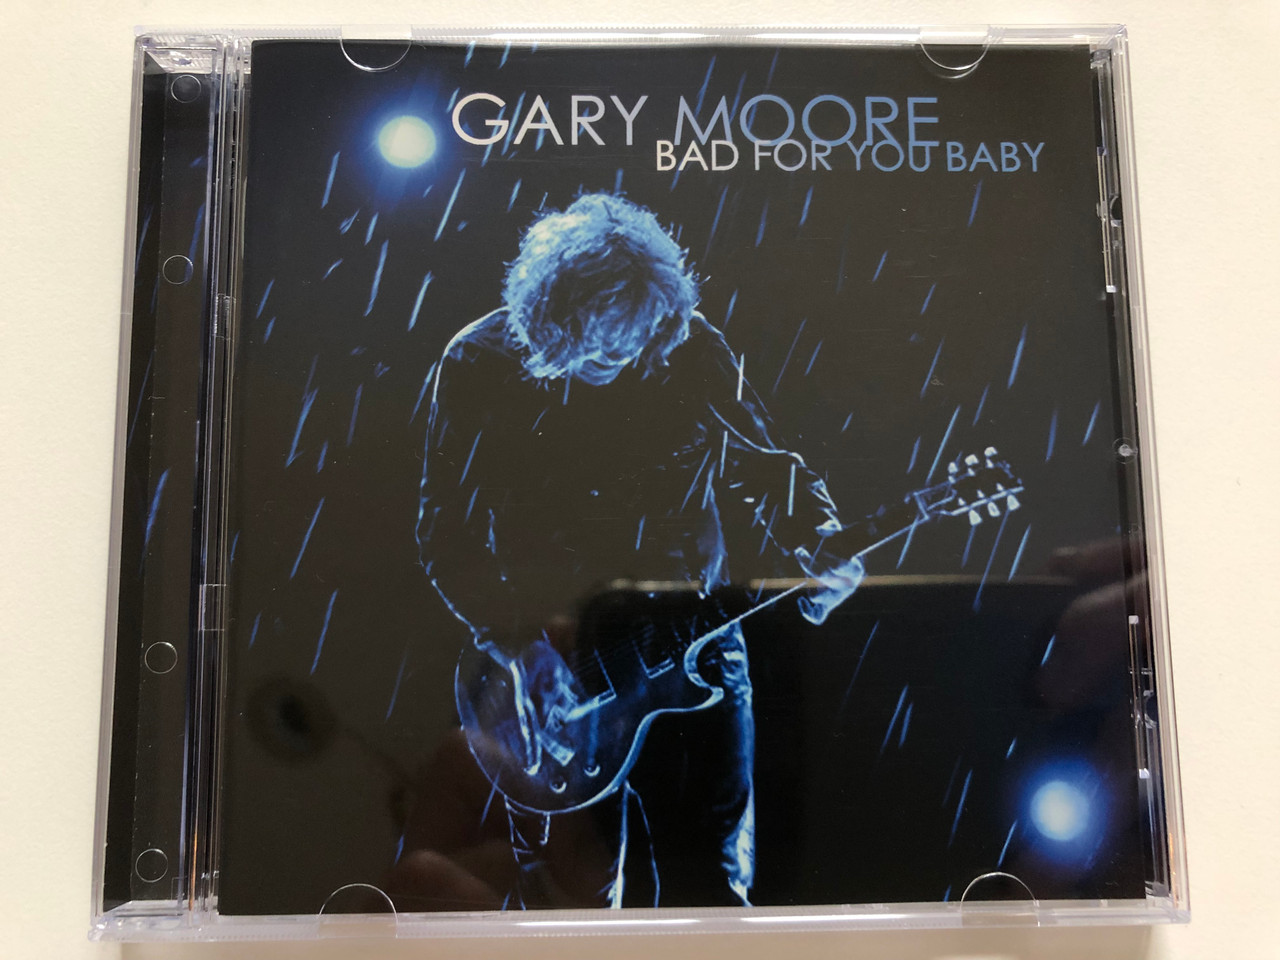 https://cdn10.bigcommerce.com/s-62bdpkt7pb/products/30855/images/182044/Gary_Moore_-_Bad_For_You_Baby_Eagle_Records_Audio_CD_2008_EAGCD379_1__09054.1624288834.1280.1280.JPG?c=2